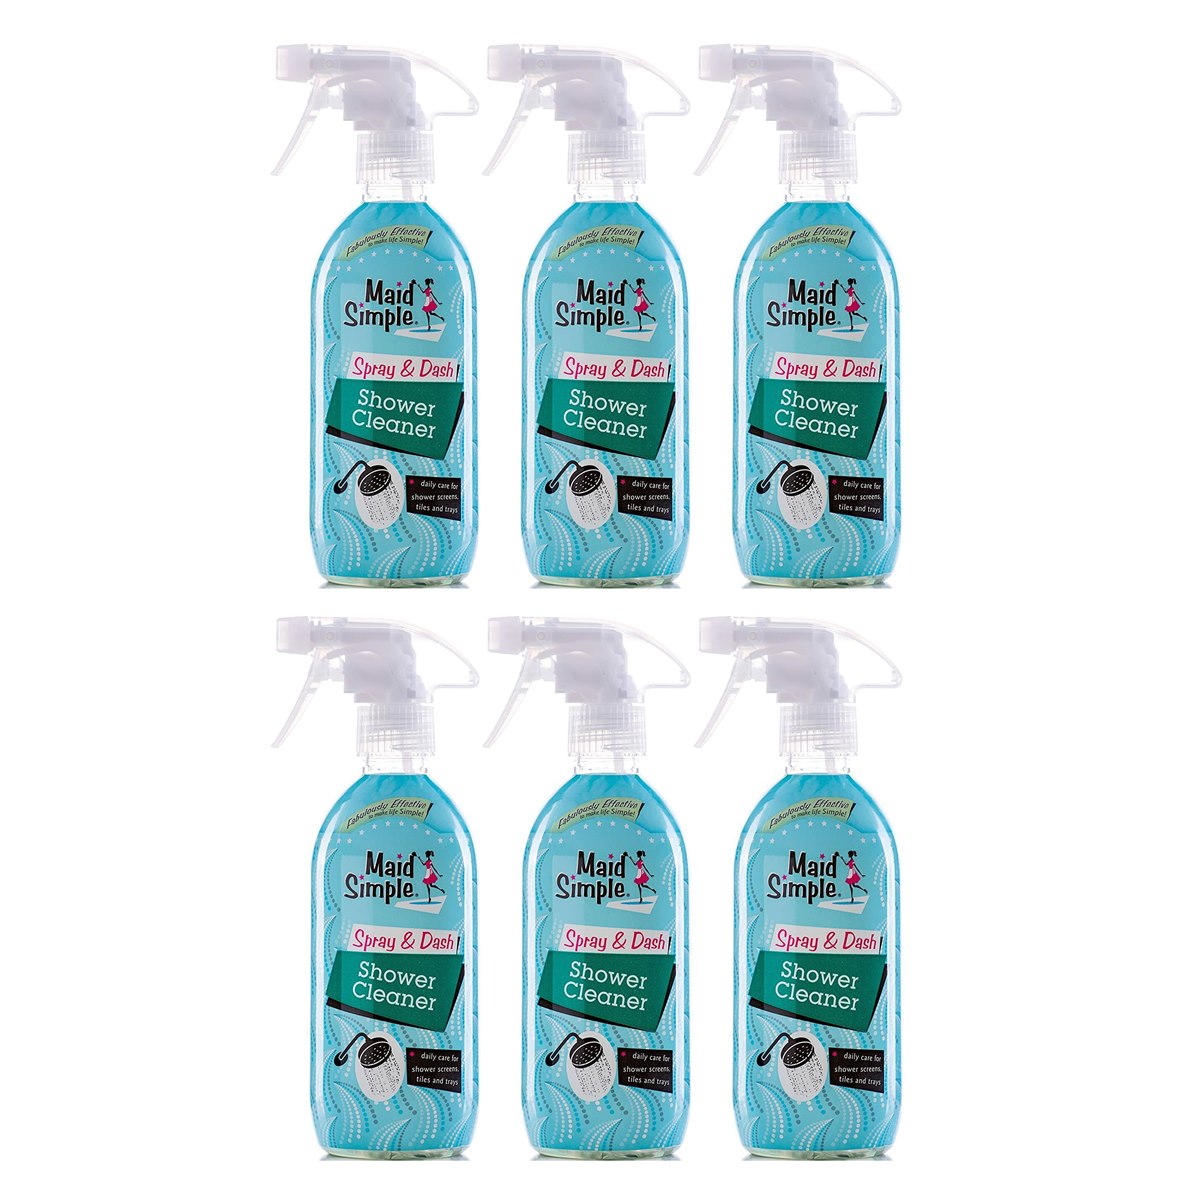 Case of 6 x Maid Simple Shower Cleaner Spray 500ml